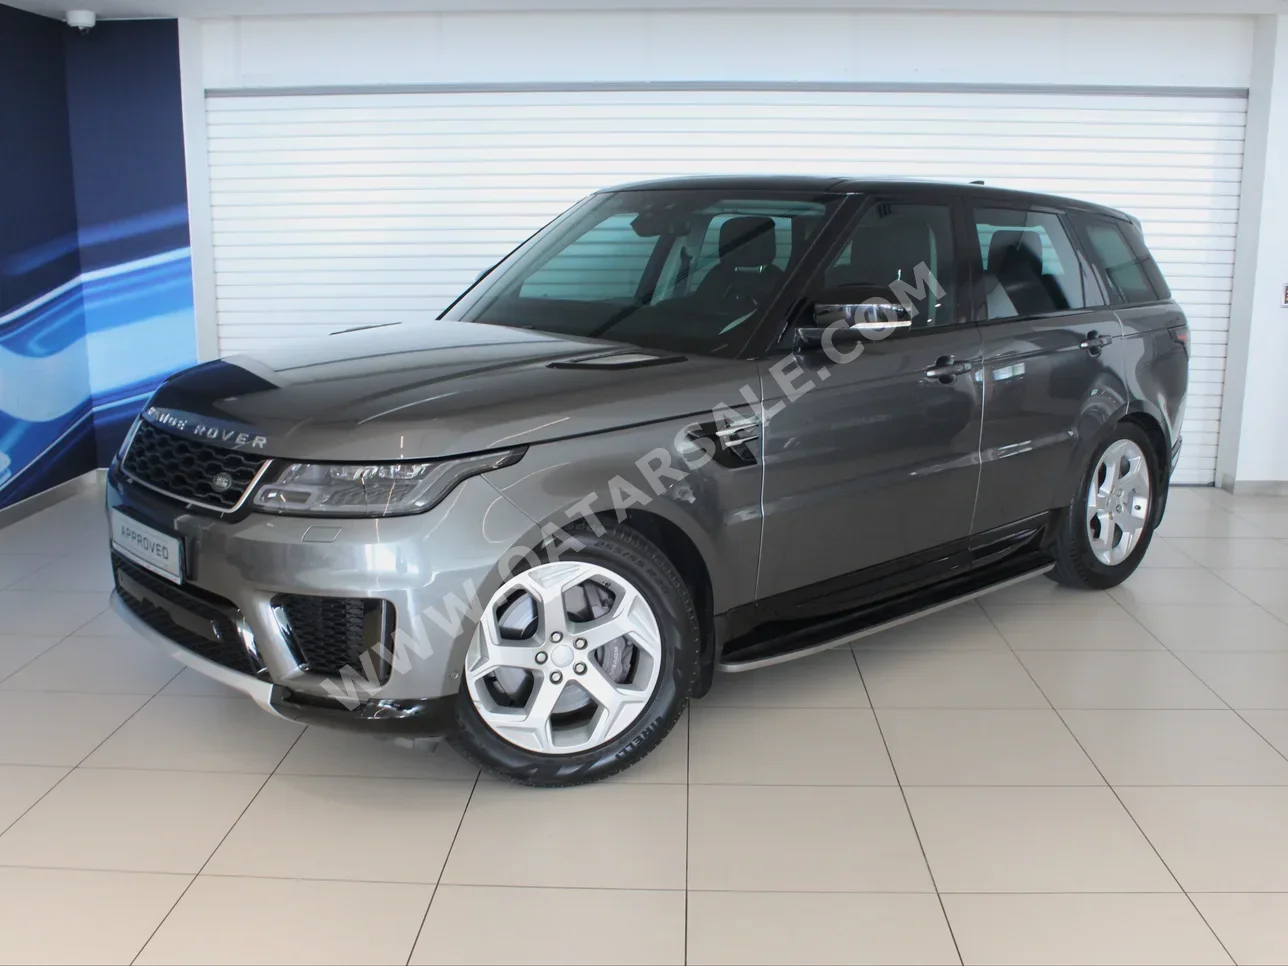 Land Rover  Range Rover  Sport HSE  2019  Automatic  62,430 Km  6 Cylinder  Four Wheel Drive (4WD)  SUV  Gray  With Warranty